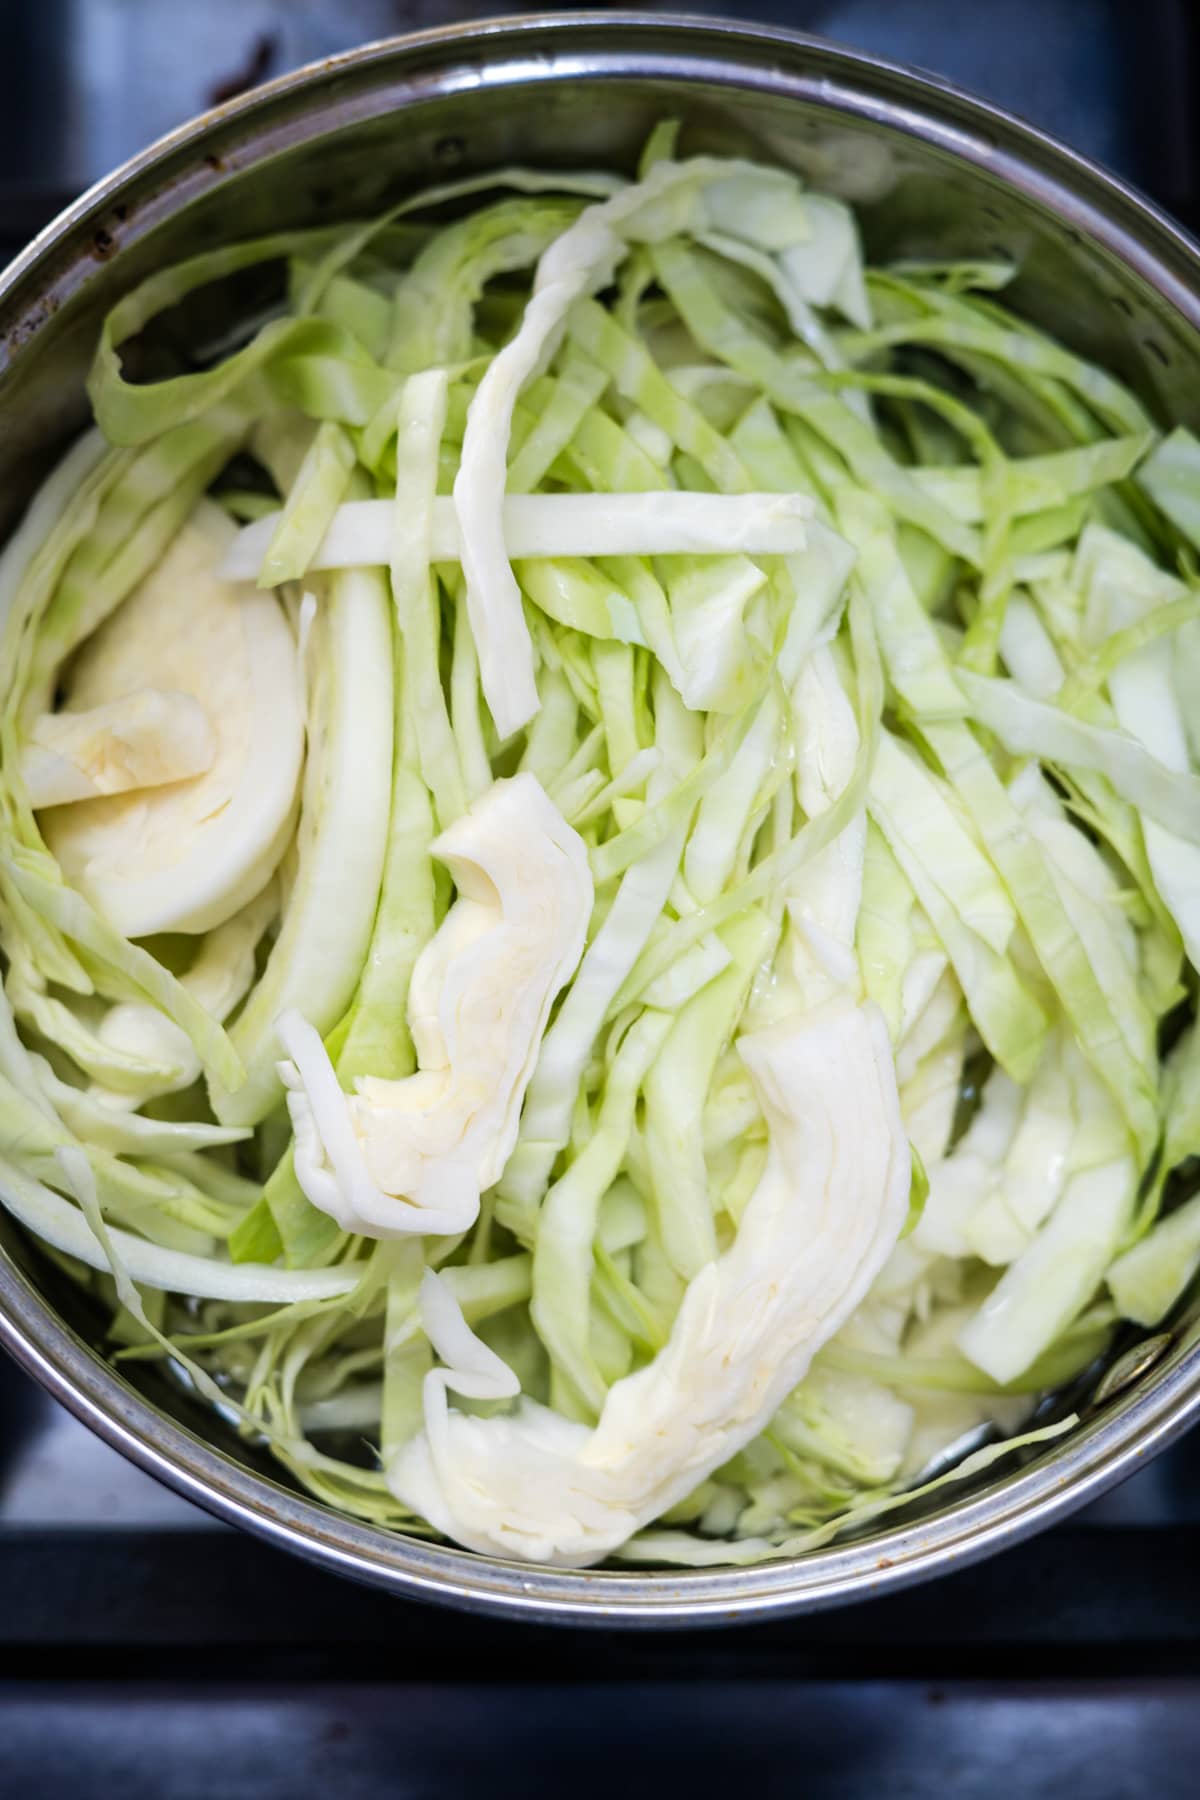 Sliced cabbage in a pan on a stove.